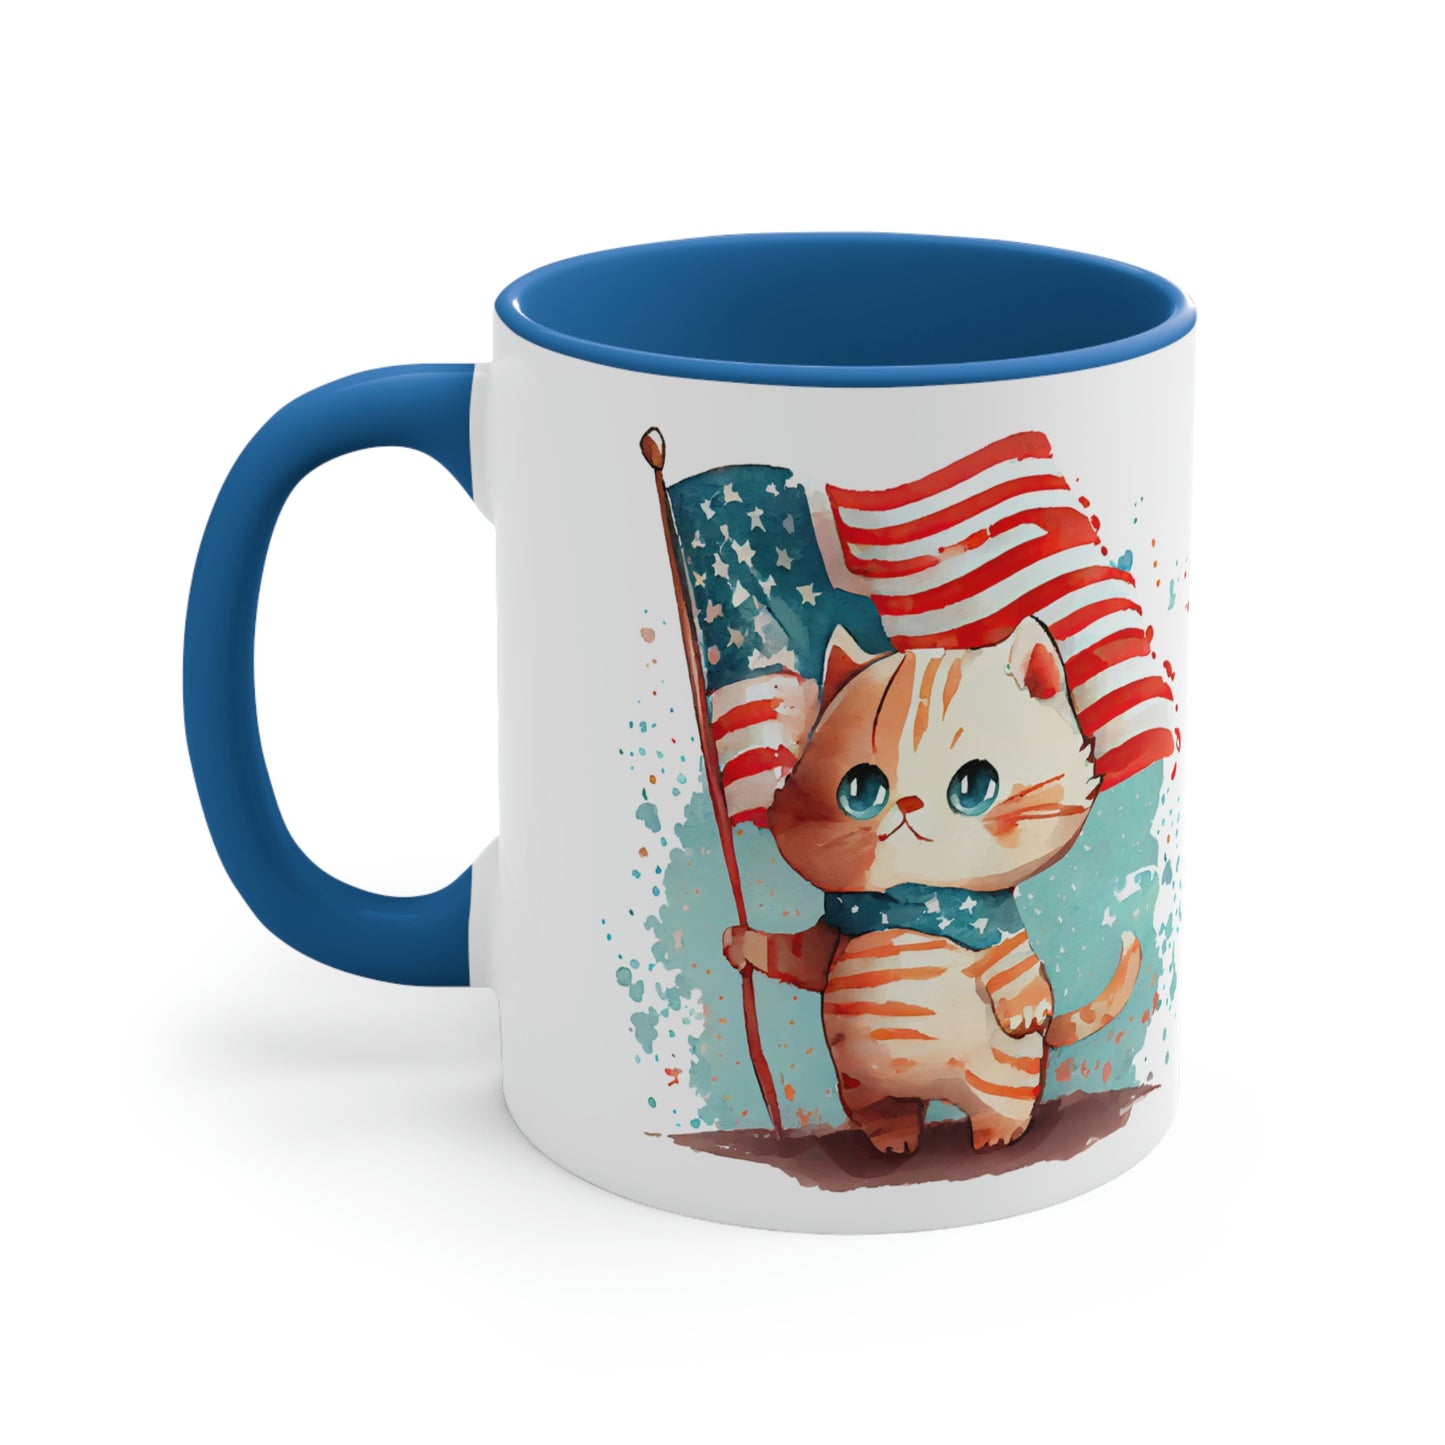 Watercolor Cat Holding American Flag Coffee Mug - Patriotic Cat Mug, Fourth of July Gift, Cat Lover Gift